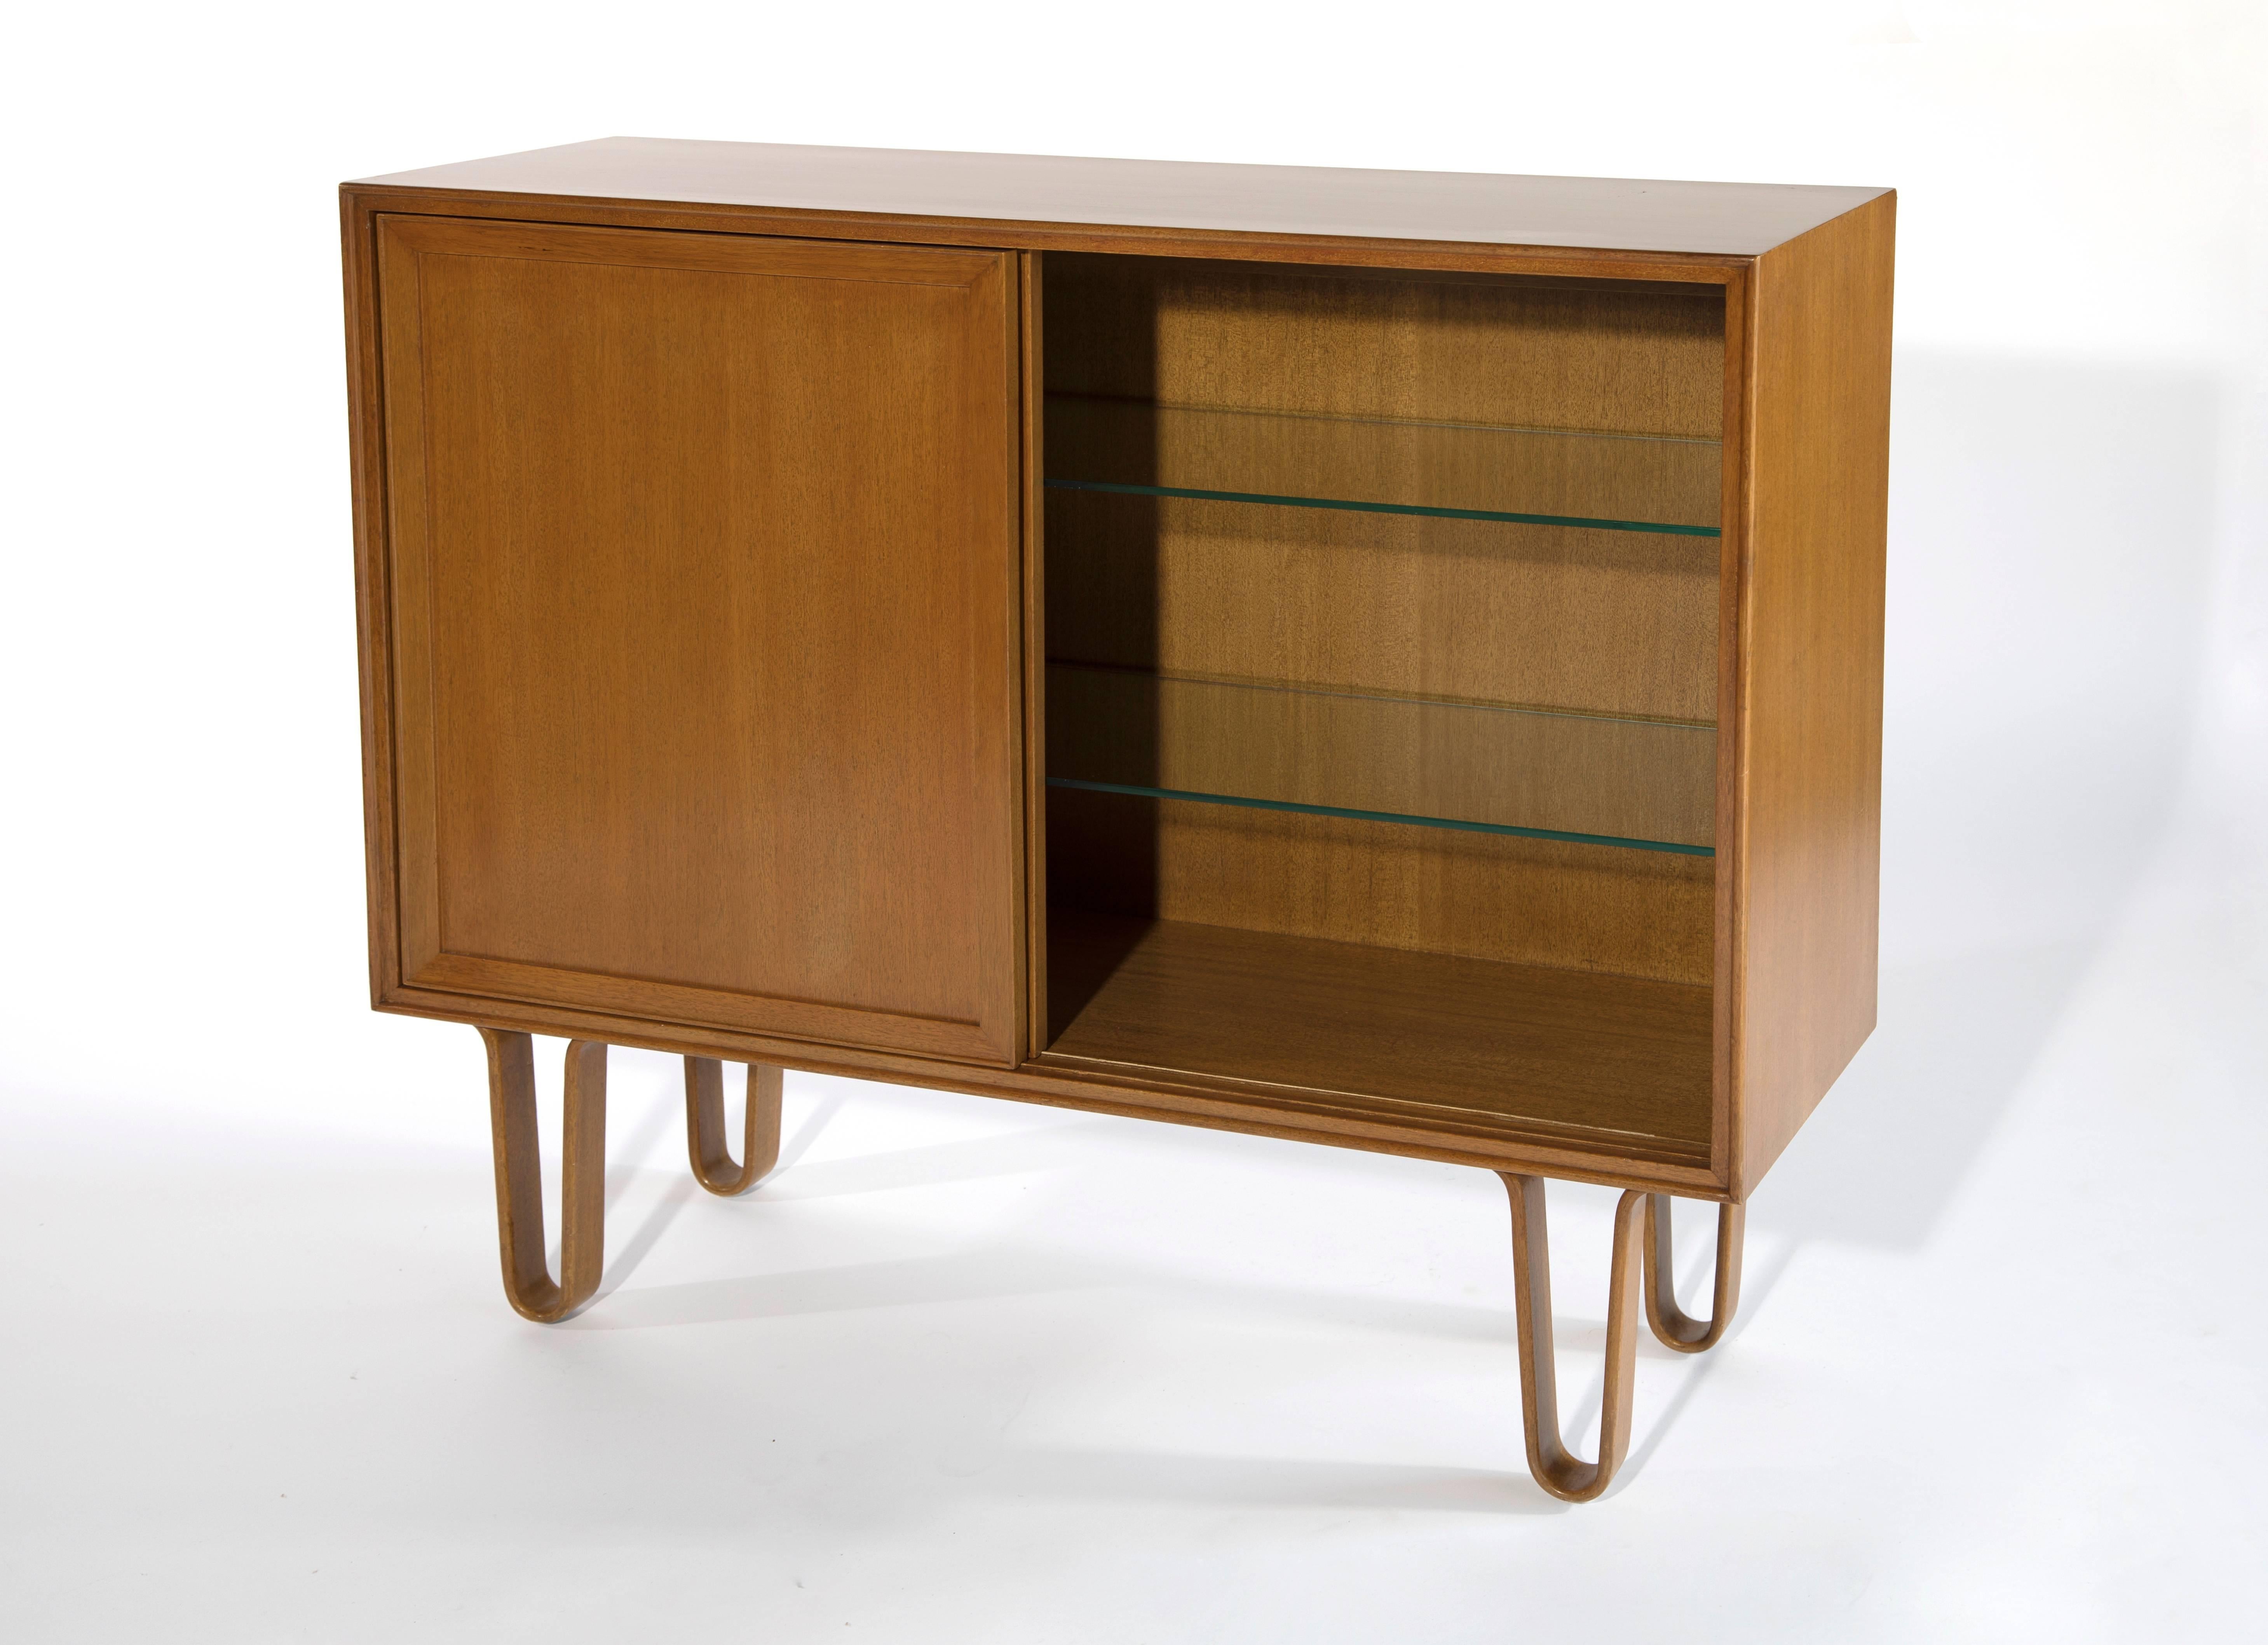 Sliding door bar cabinet on hairpin legs by Edward Wormley for Dunbar, model 4604.

USA, circa 1940s-1950s.

Laminated bentwood loop legs with two adjustable interior glass shelves.

Bleached mahogany or glass.
Measures: 36.26 H x 40.125 W x